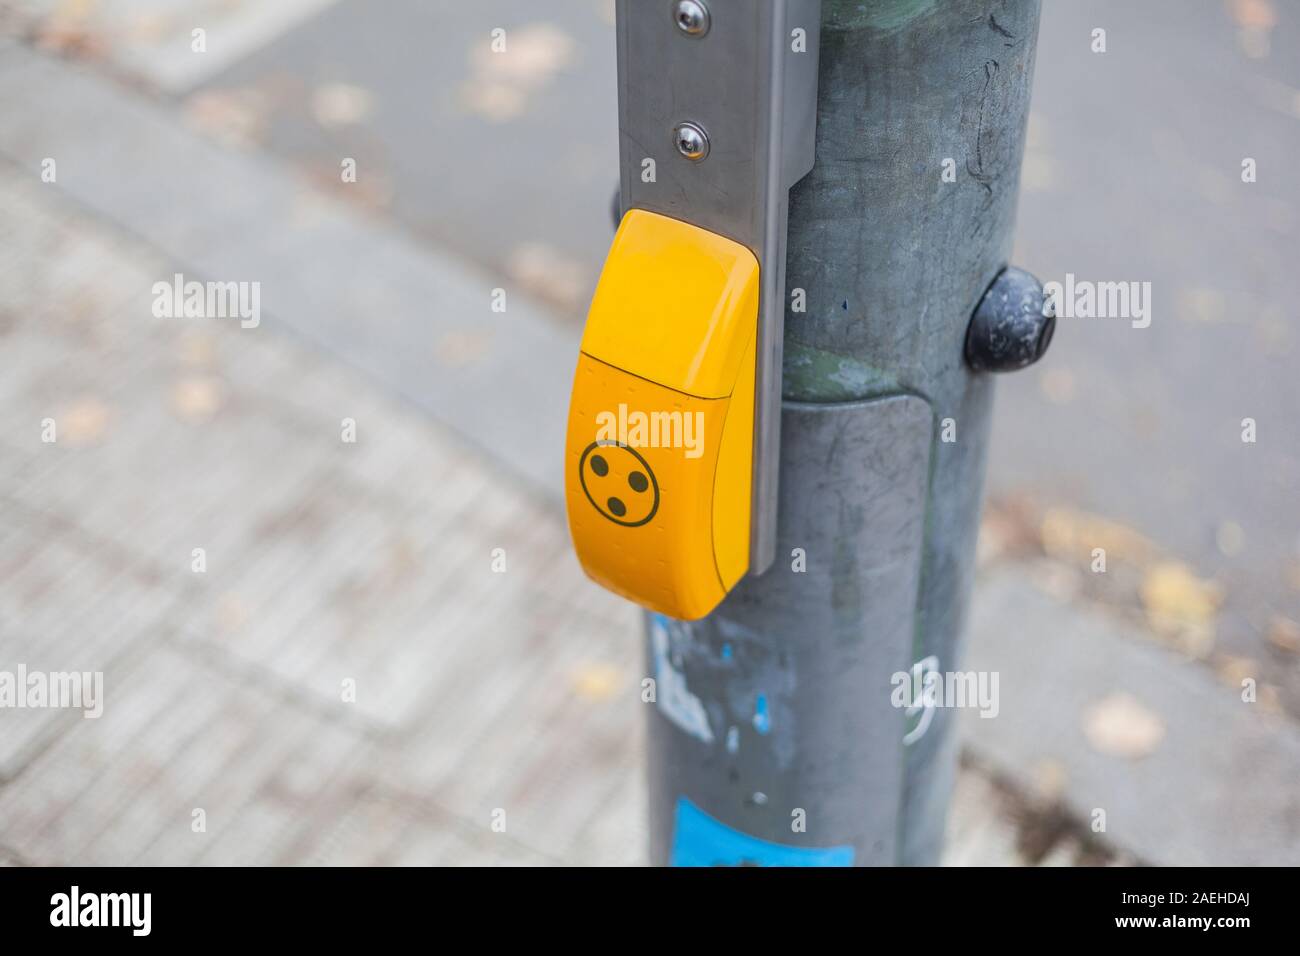 Yellow Traffic light switch for pedestrian crossing and guidance system ...